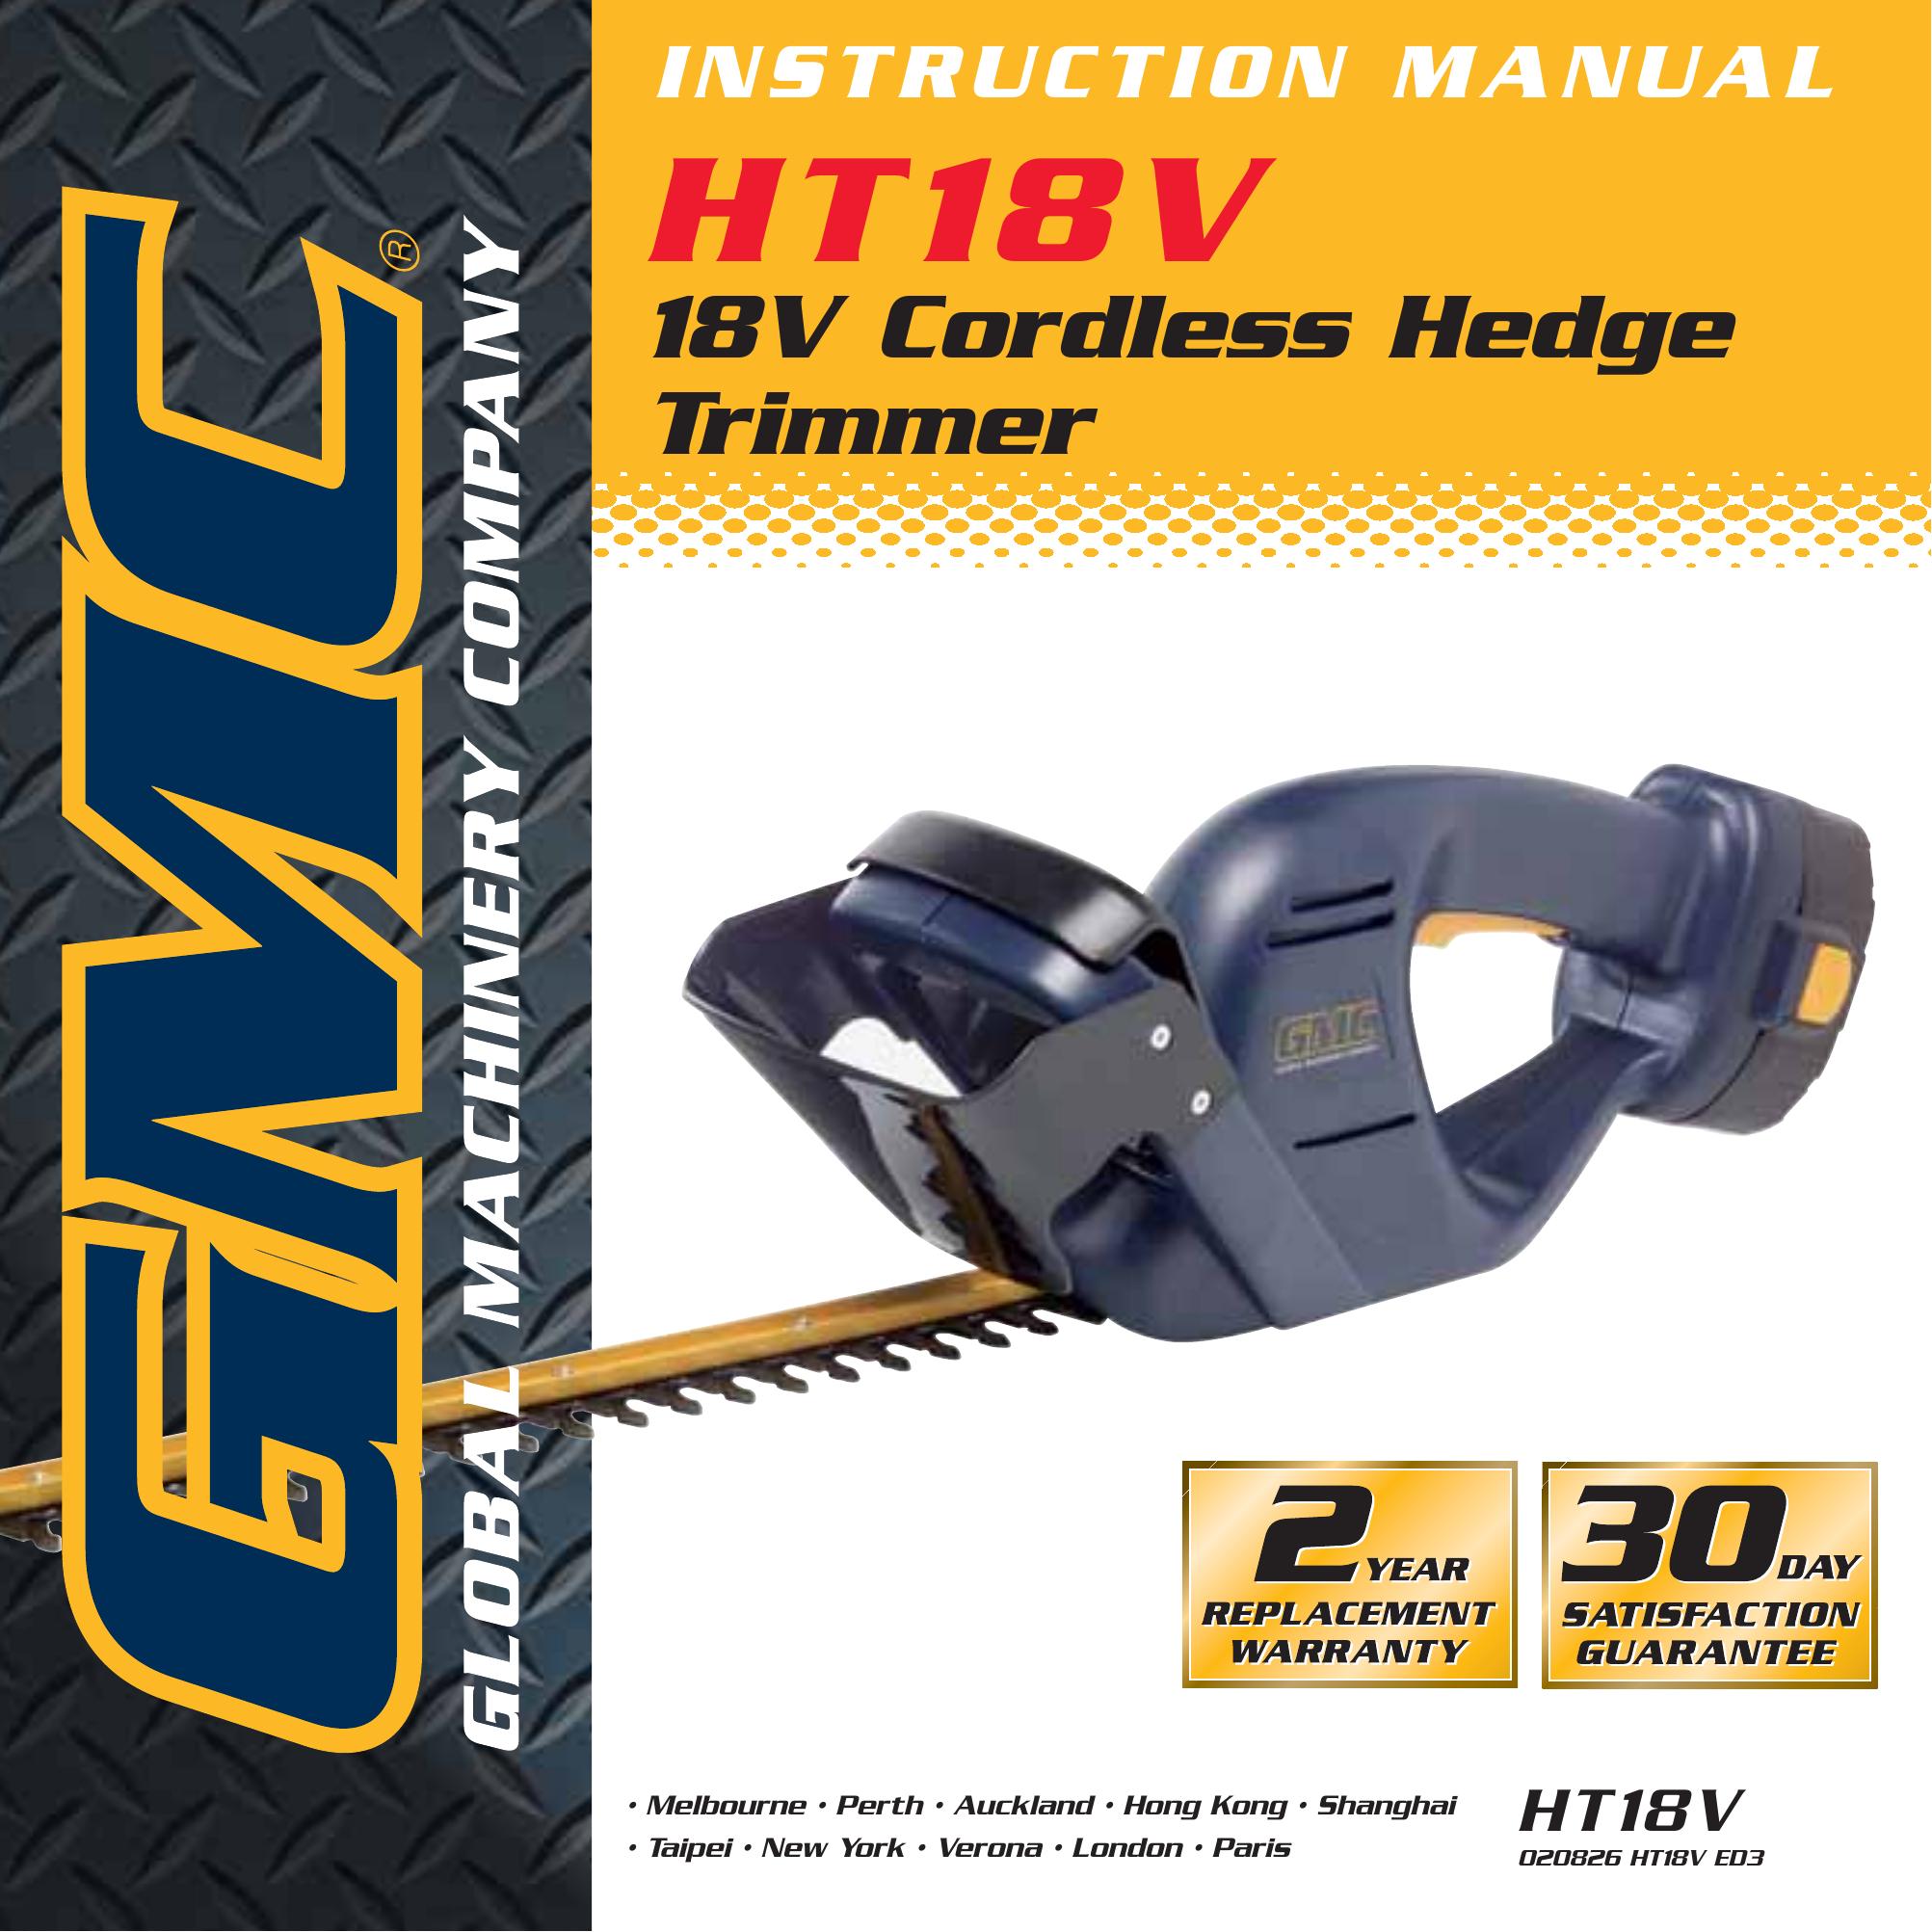 Global Machinery Company HT18V Trimmer User Manual